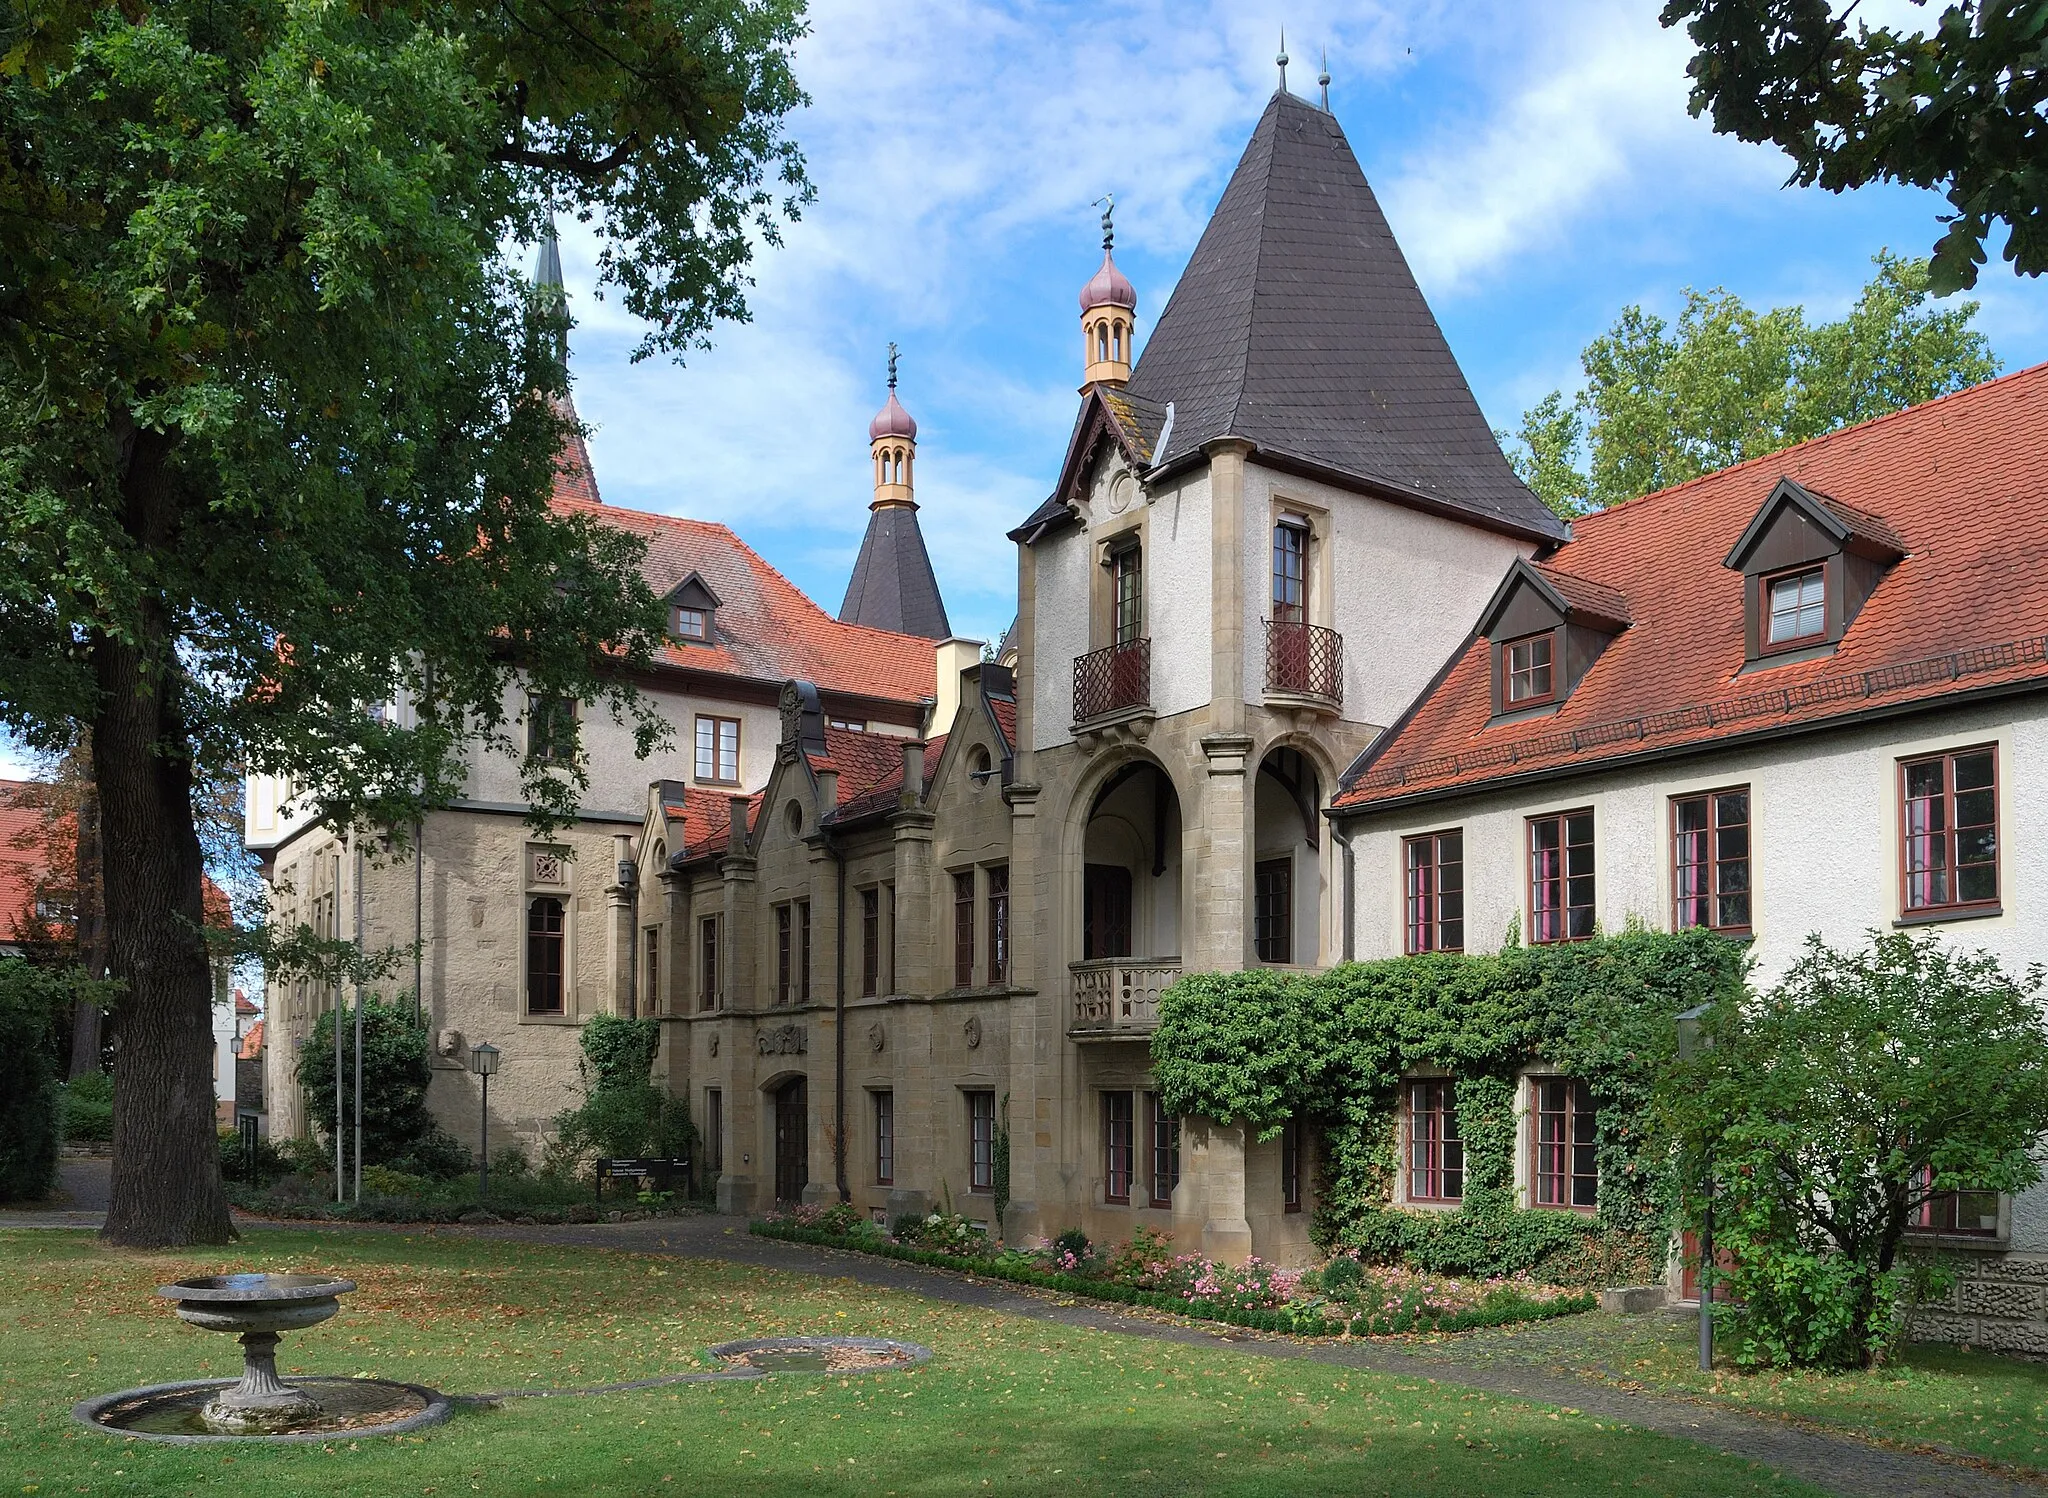 Photo showing: The south side of the castle in Hemmingen in the German Federal State Baden-Württemberg.